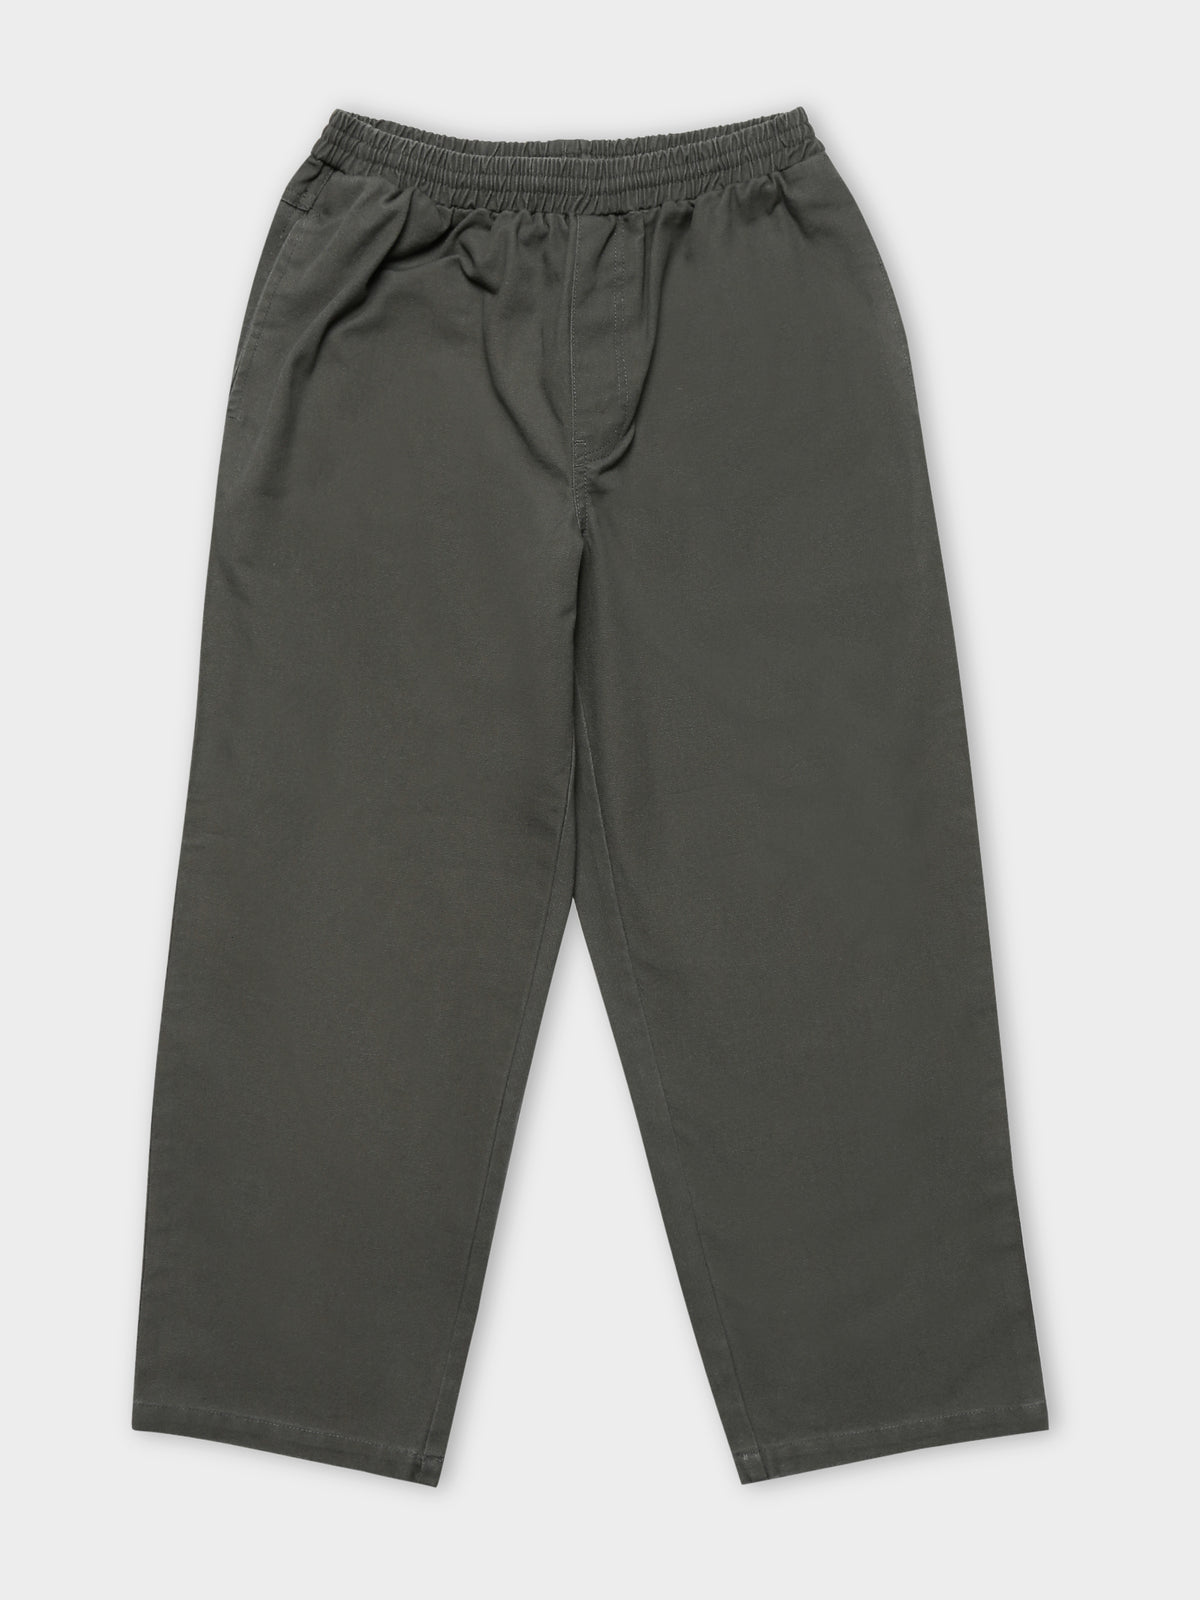 91 Pants in Charcoal